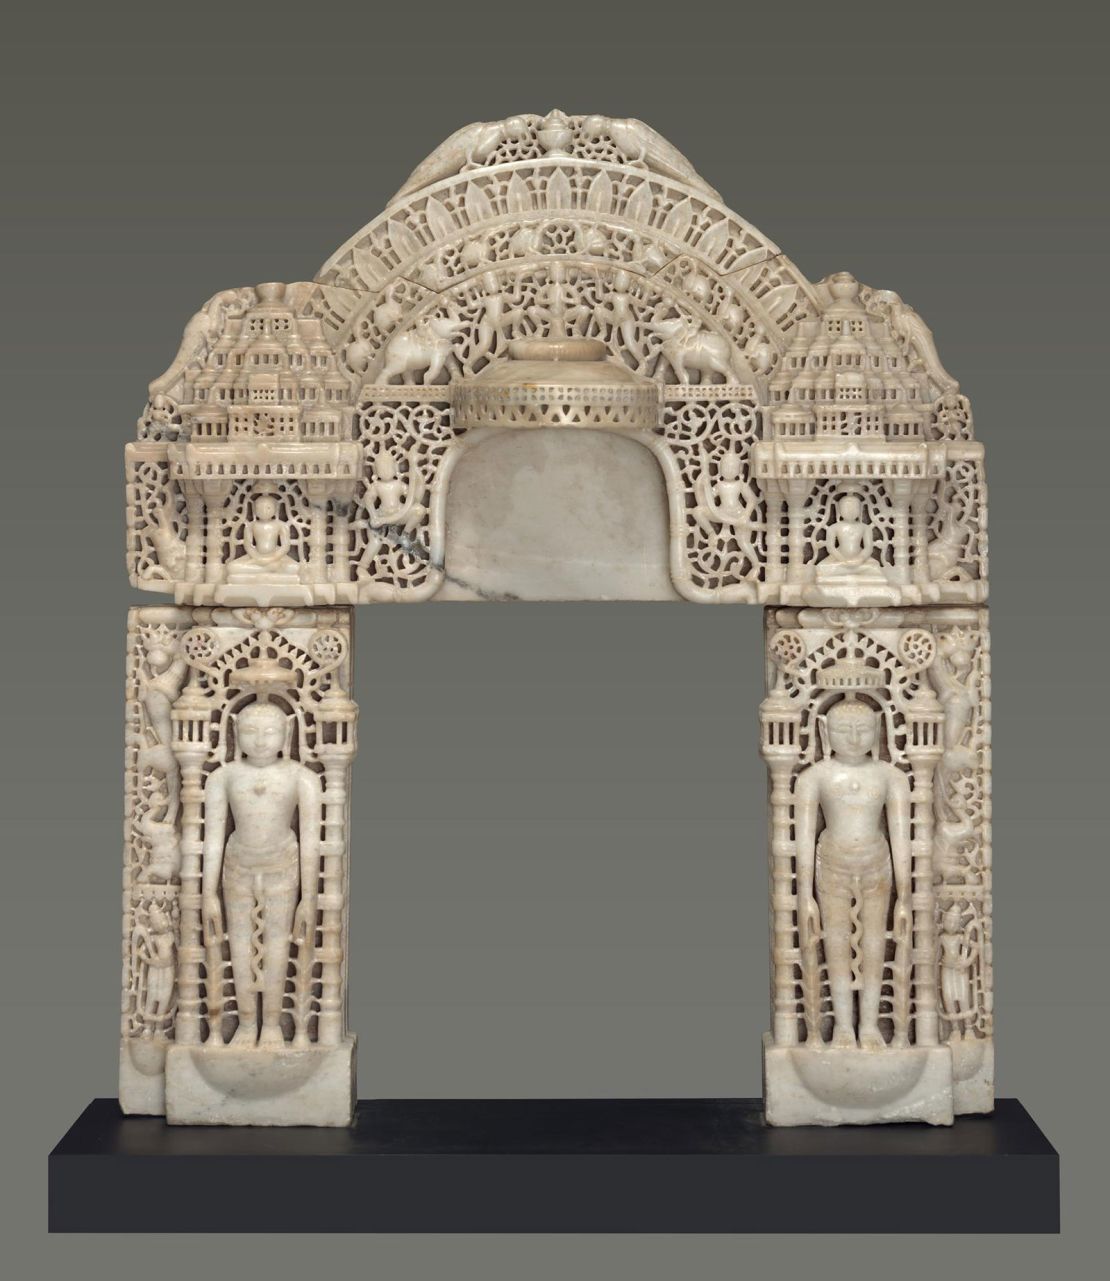 An image provided by the Manhattan District Attorney's office shows an elaborately carved marble archway, dating to the 12th or 13th centuries, that US investigators believe Kapoor smuggled into the US from India. The arch was later donated by a private collector to the Yale University Art Gallery.